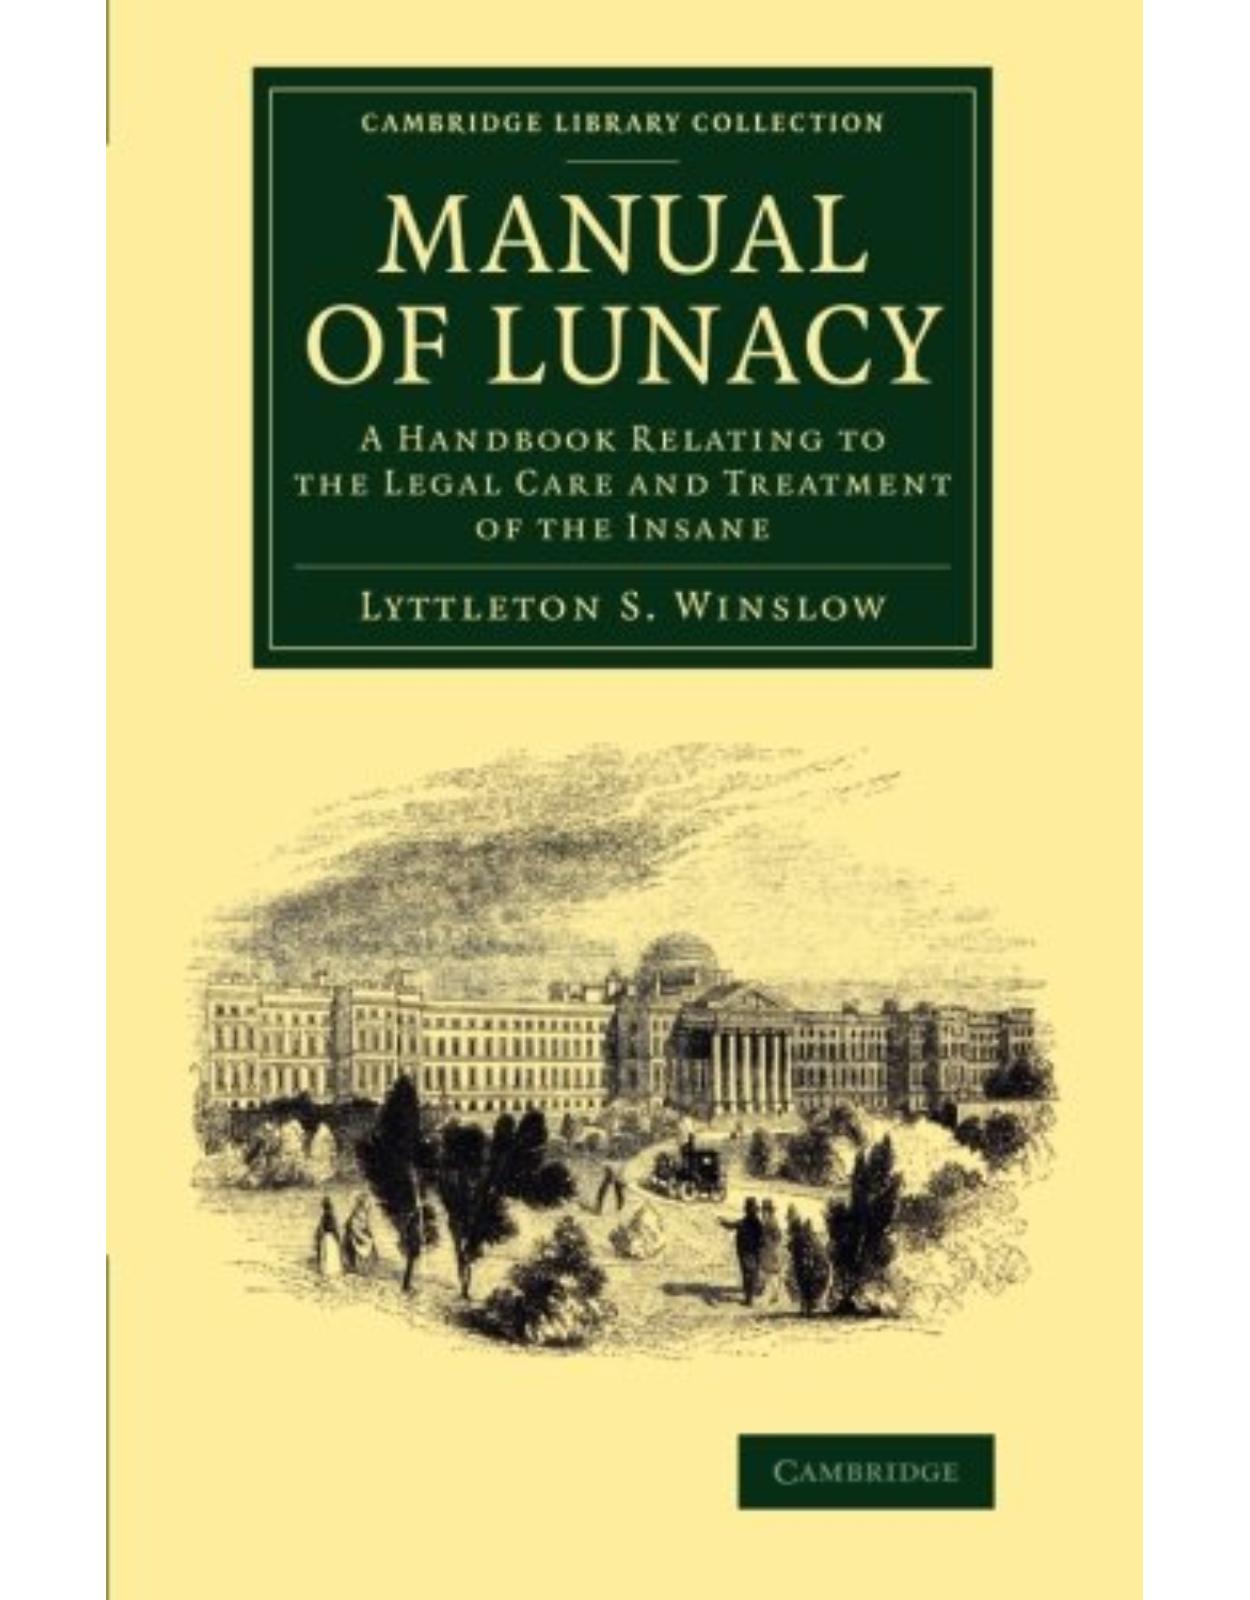 Manual of Lunacy: A Handbook Relating to the Legal Care and Treatment of the Insane in the Public and Private Asylums of Great Britain, Ireland, United States of America, and the Continent